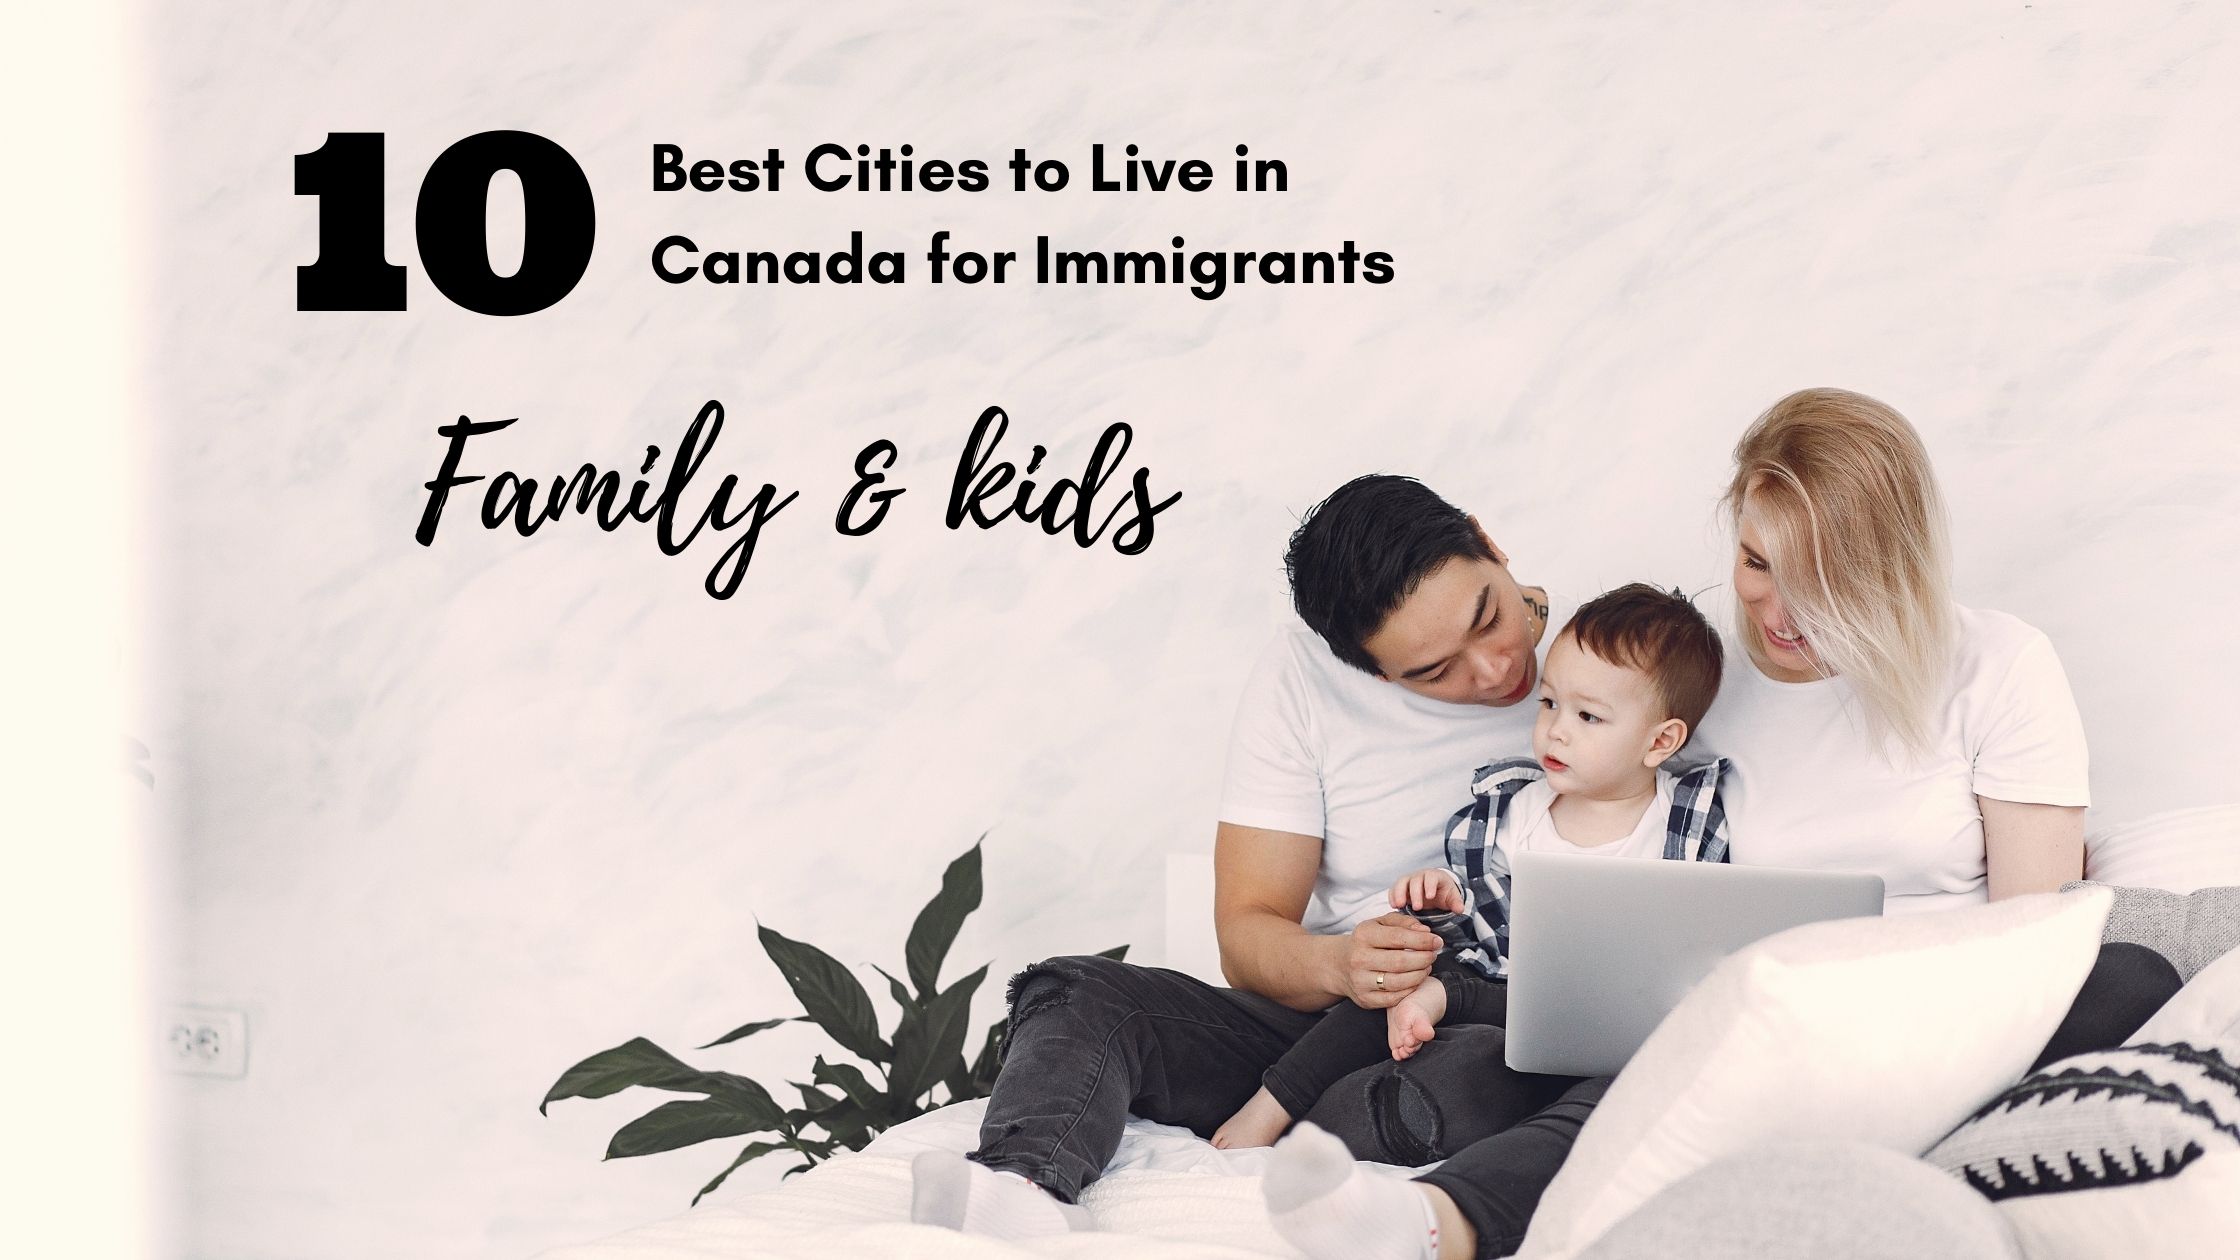 10 Best Cities to Live in Canada for Immigrants with family & kids 2023